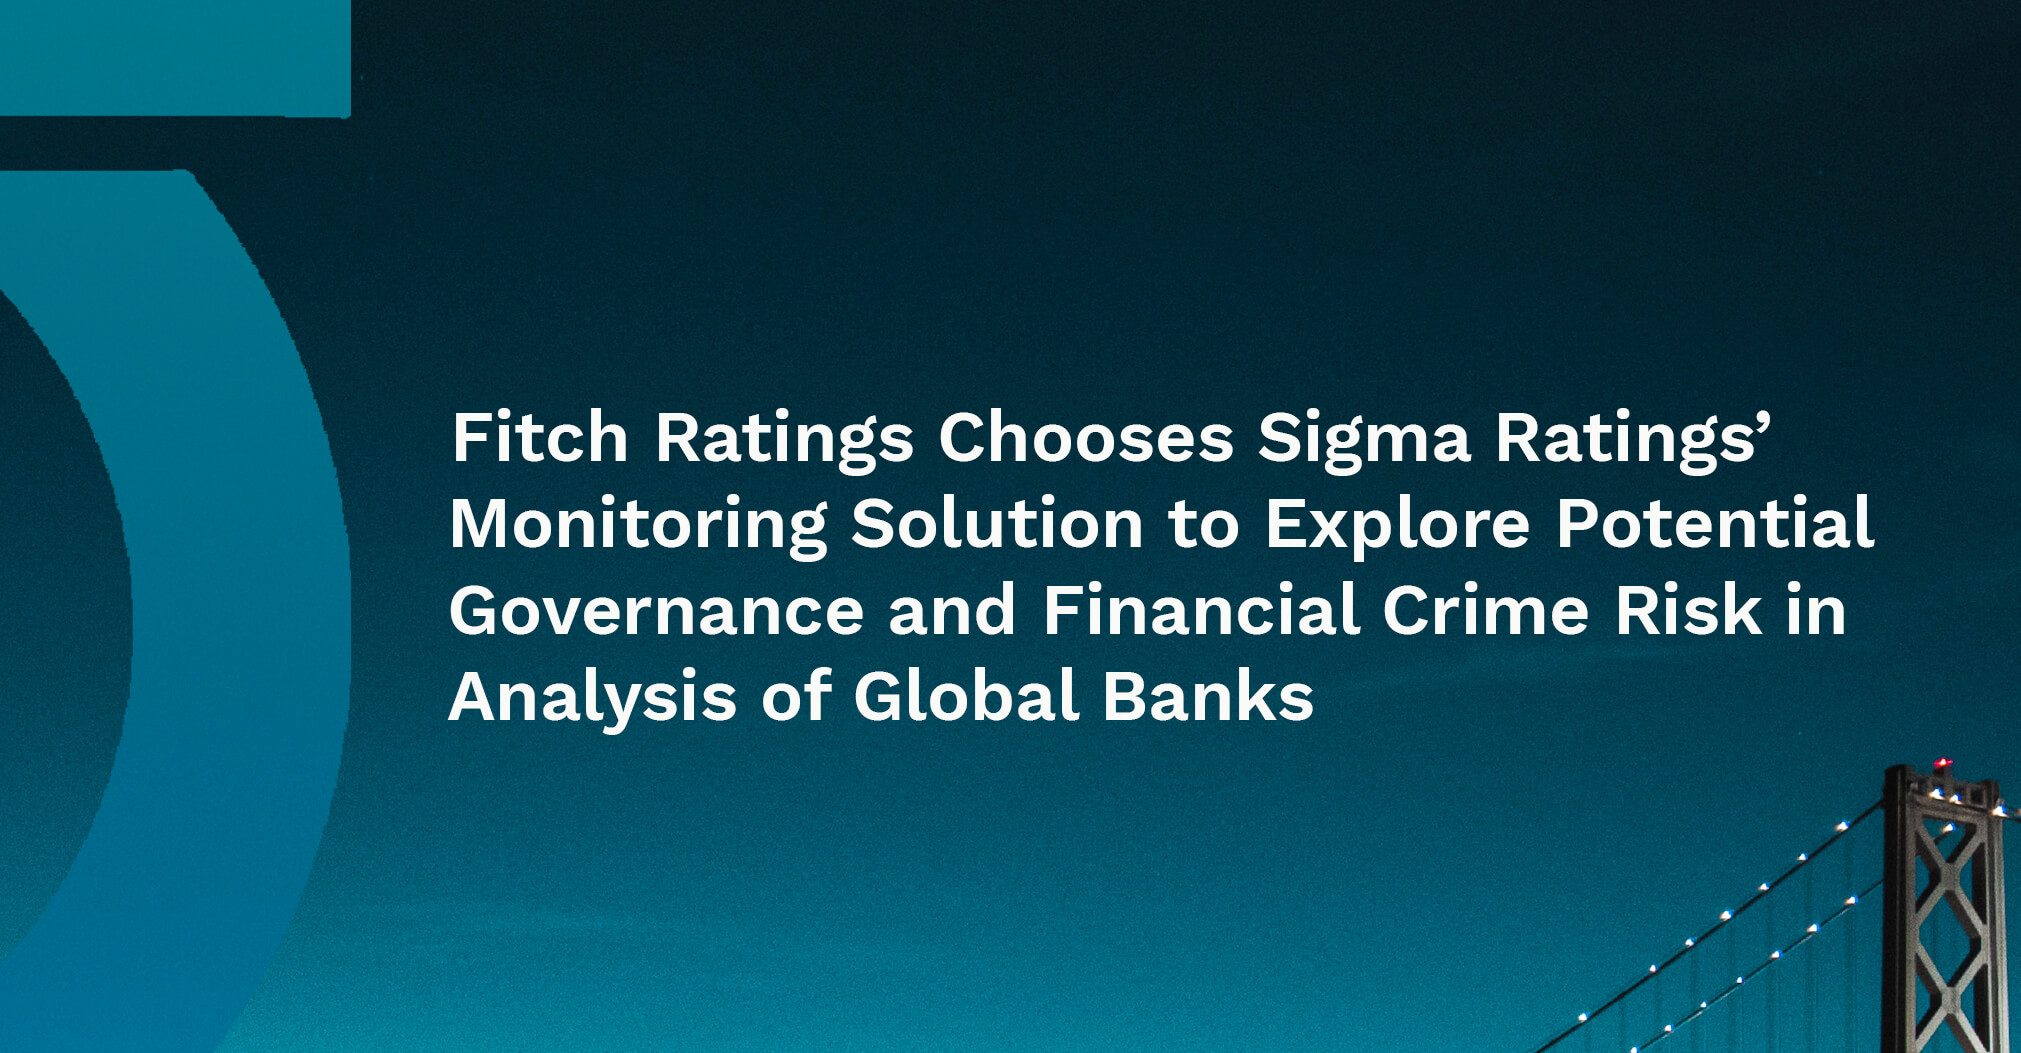 Fitch Ratings Chooses Sigma Ratings’ Monitoring Solution